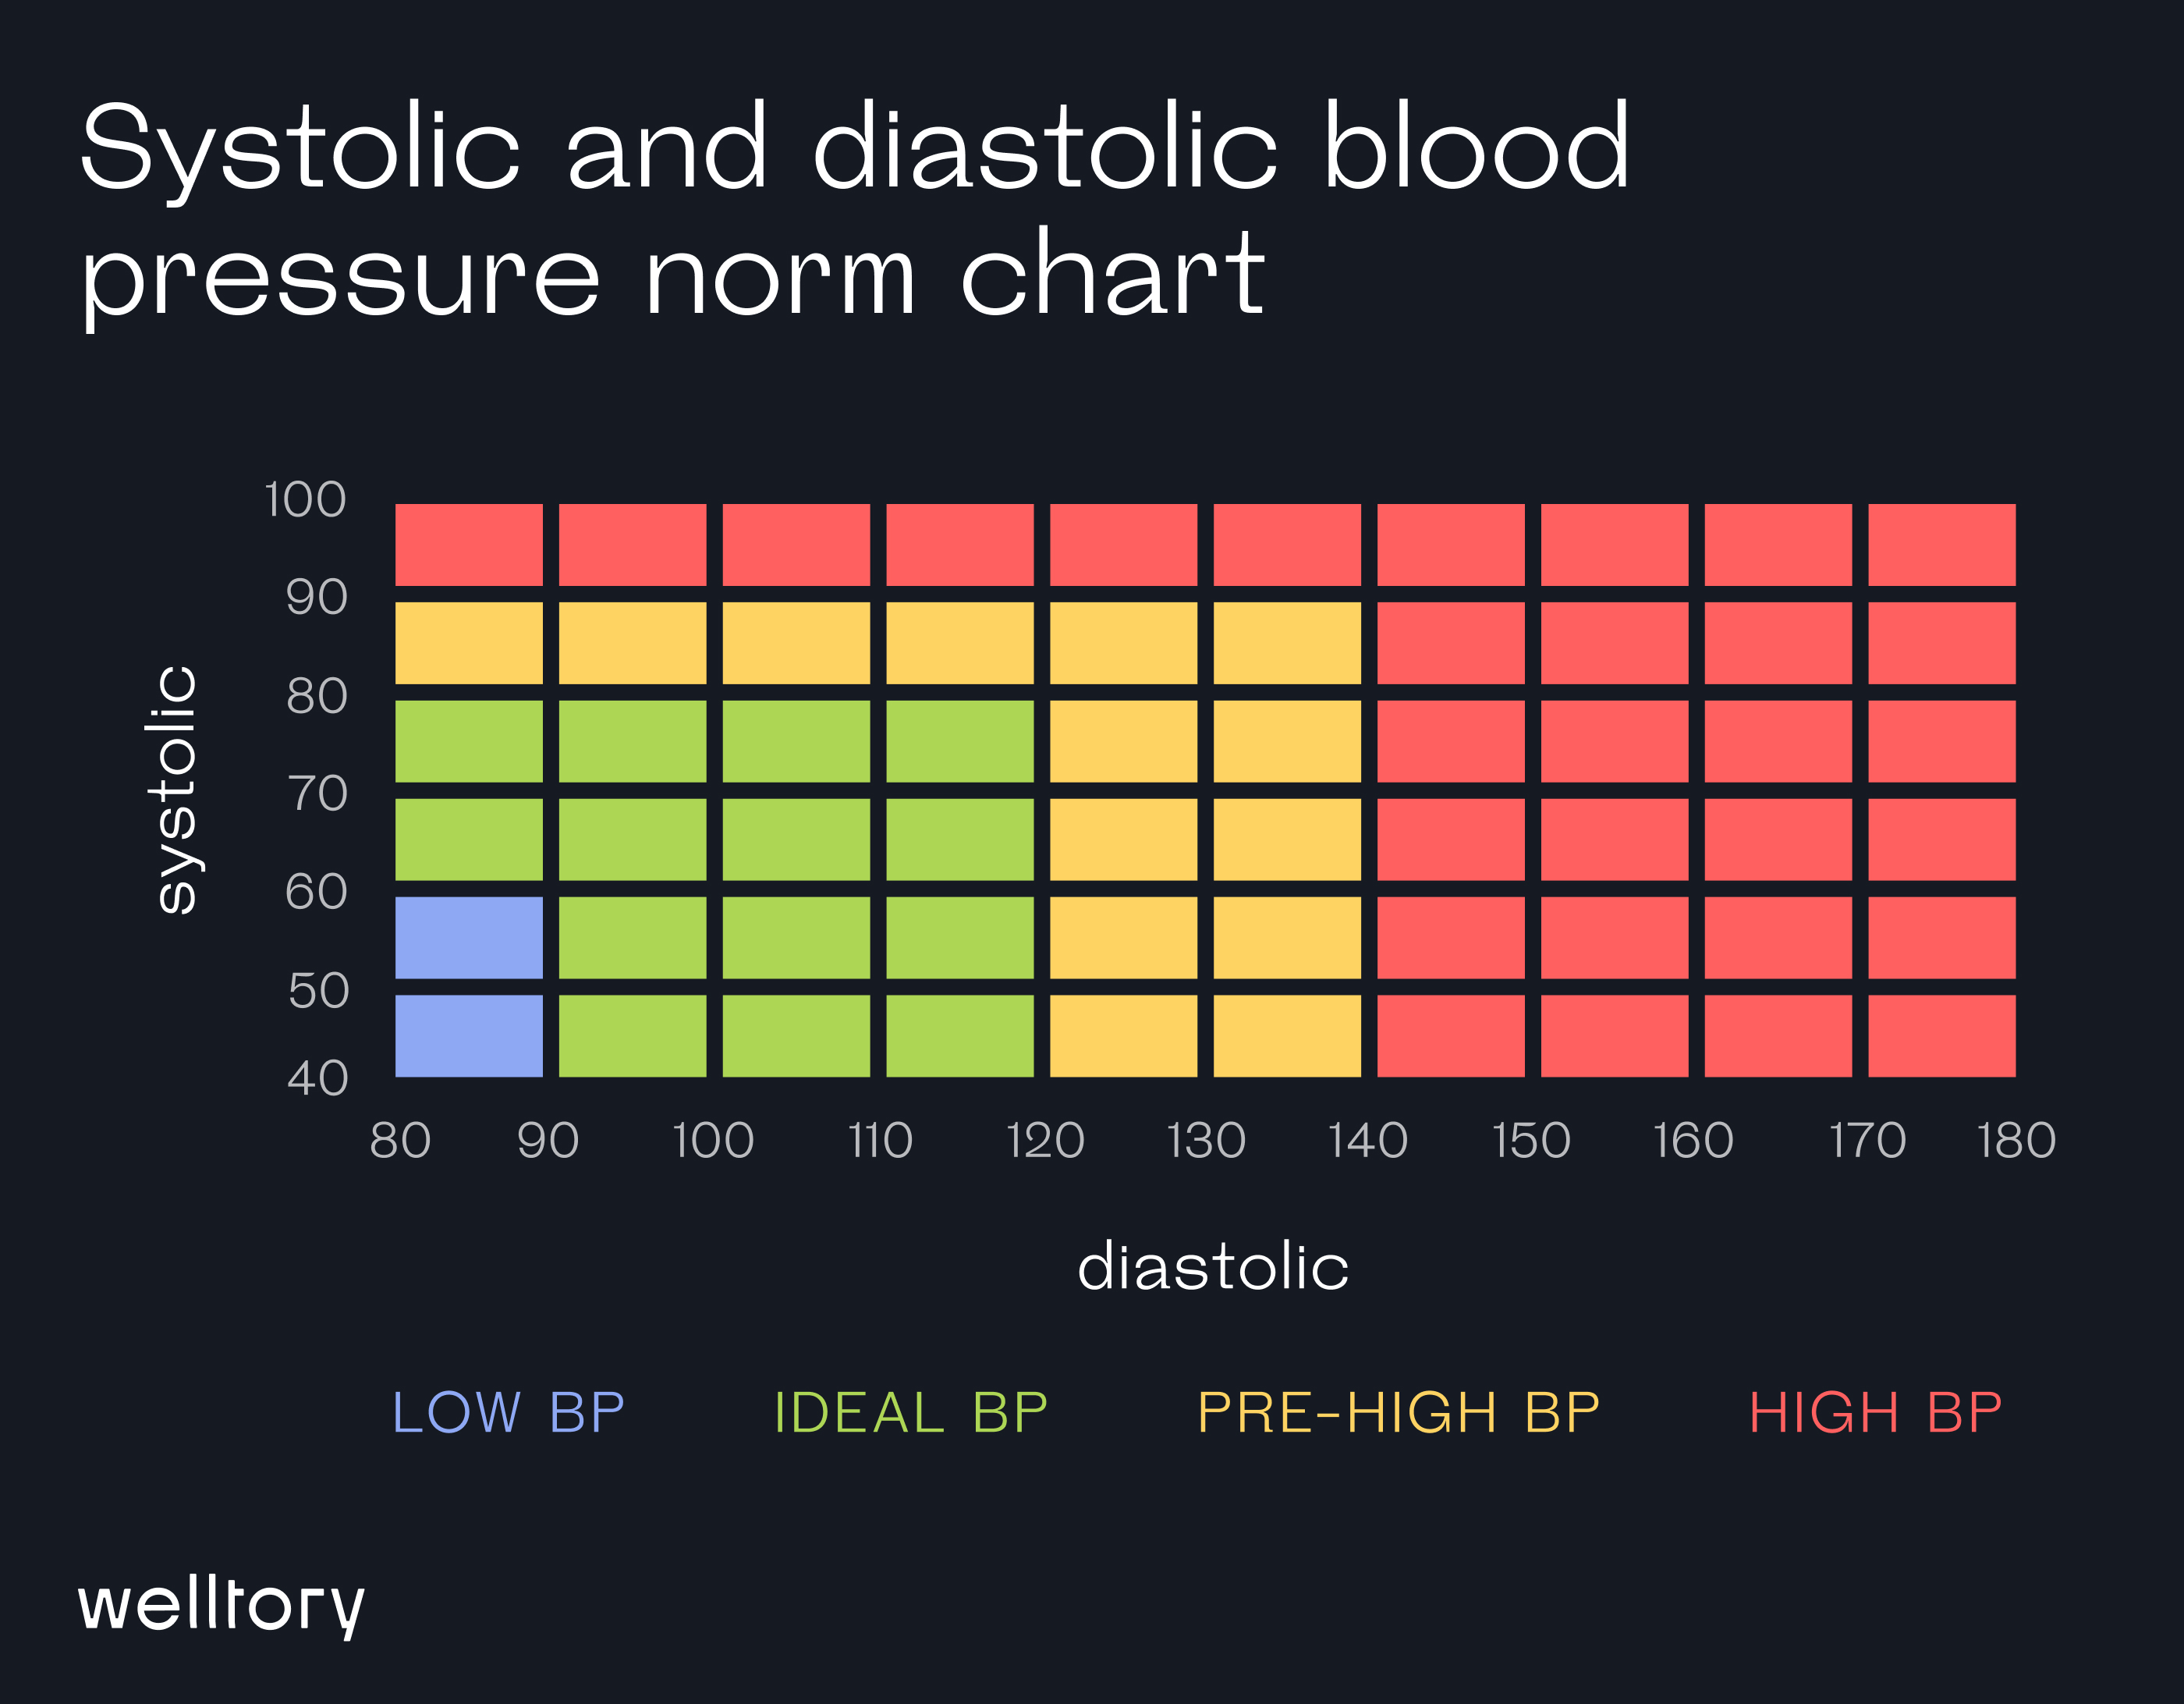 systolic and diastolic blood pressure norm chart